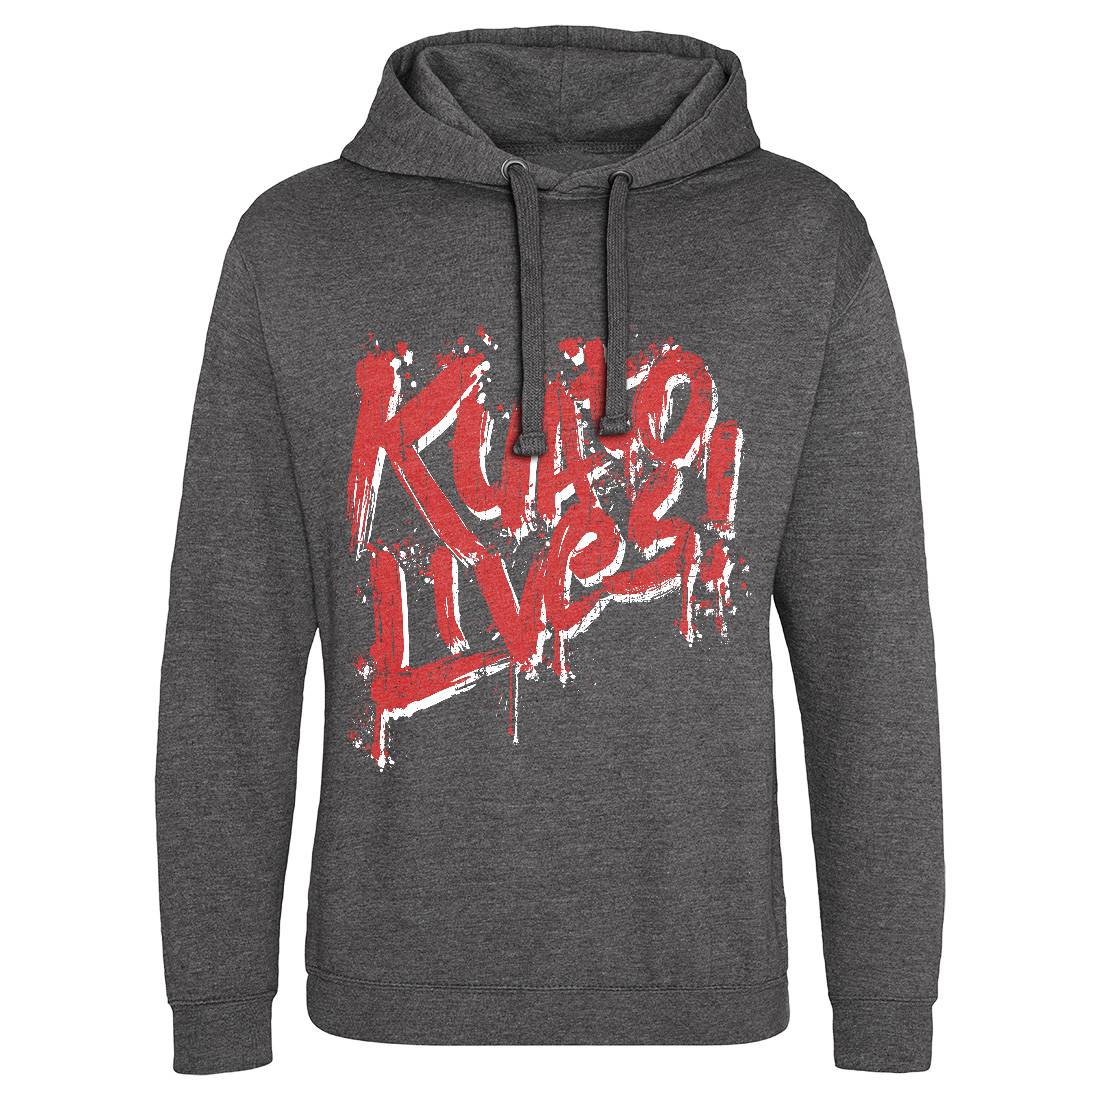 Kuato Lives Mens Hoodie Without Pocket Space D249